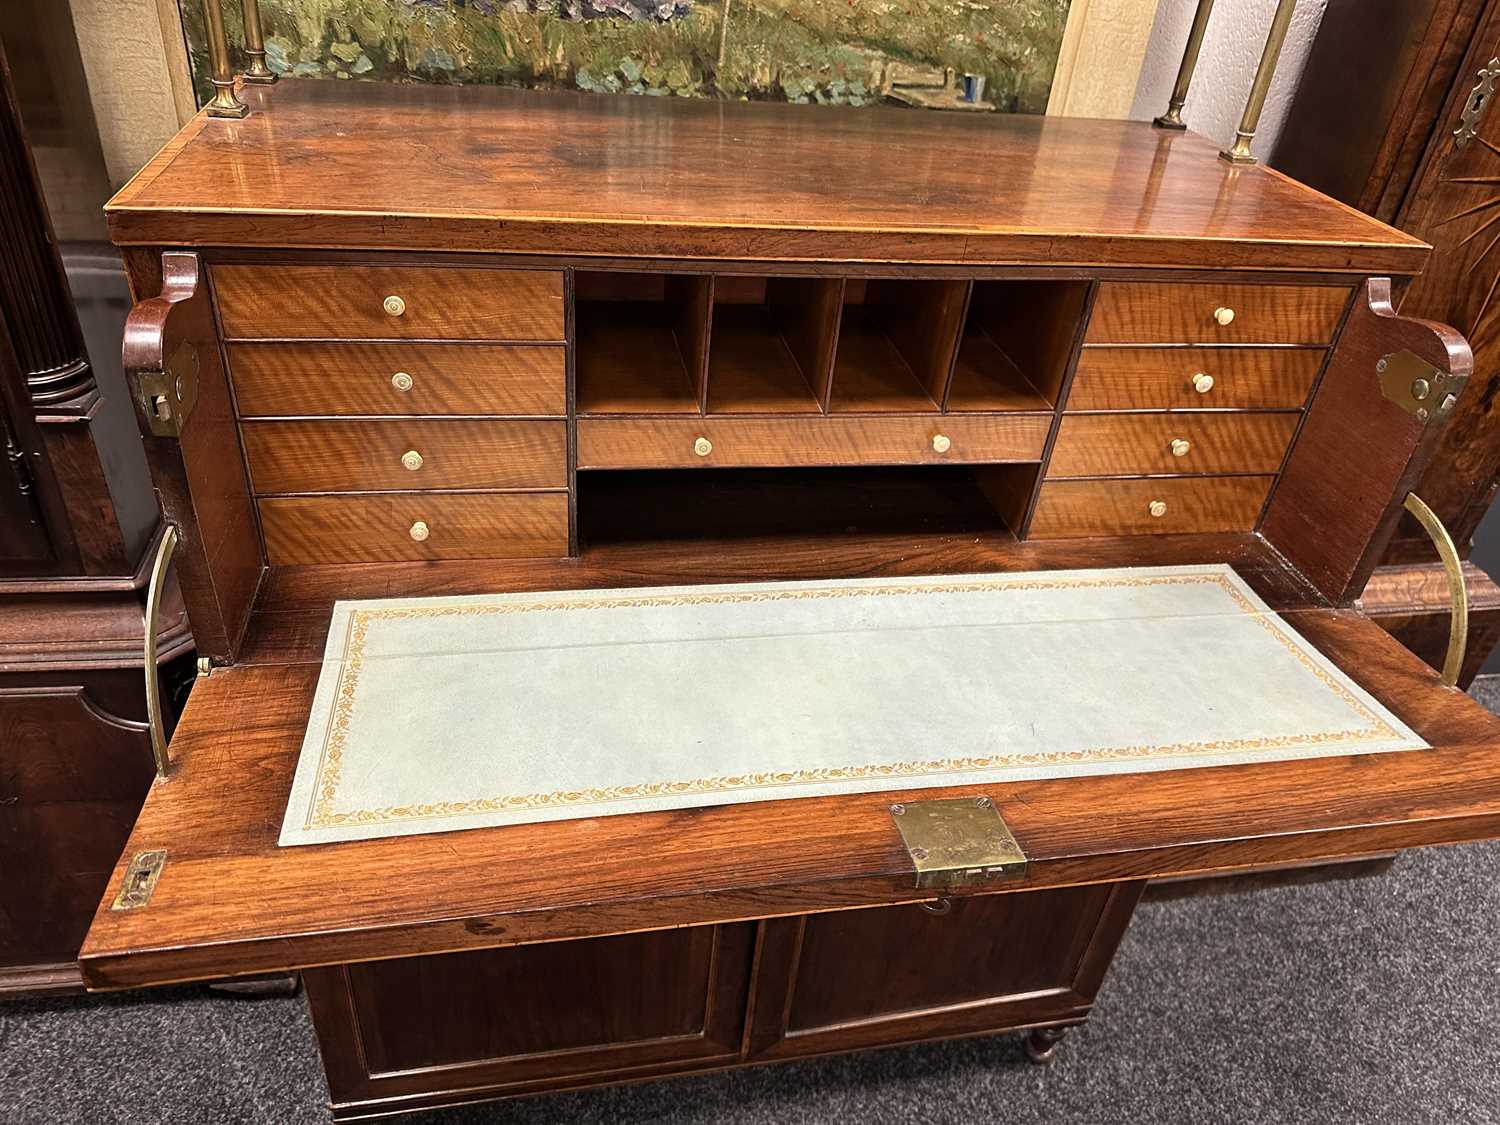 A REGENCY ROSEWOOD AND KING WOOD CROSS-BANDED SECRETAIRE SIDE CABINET - Image 17 of 17